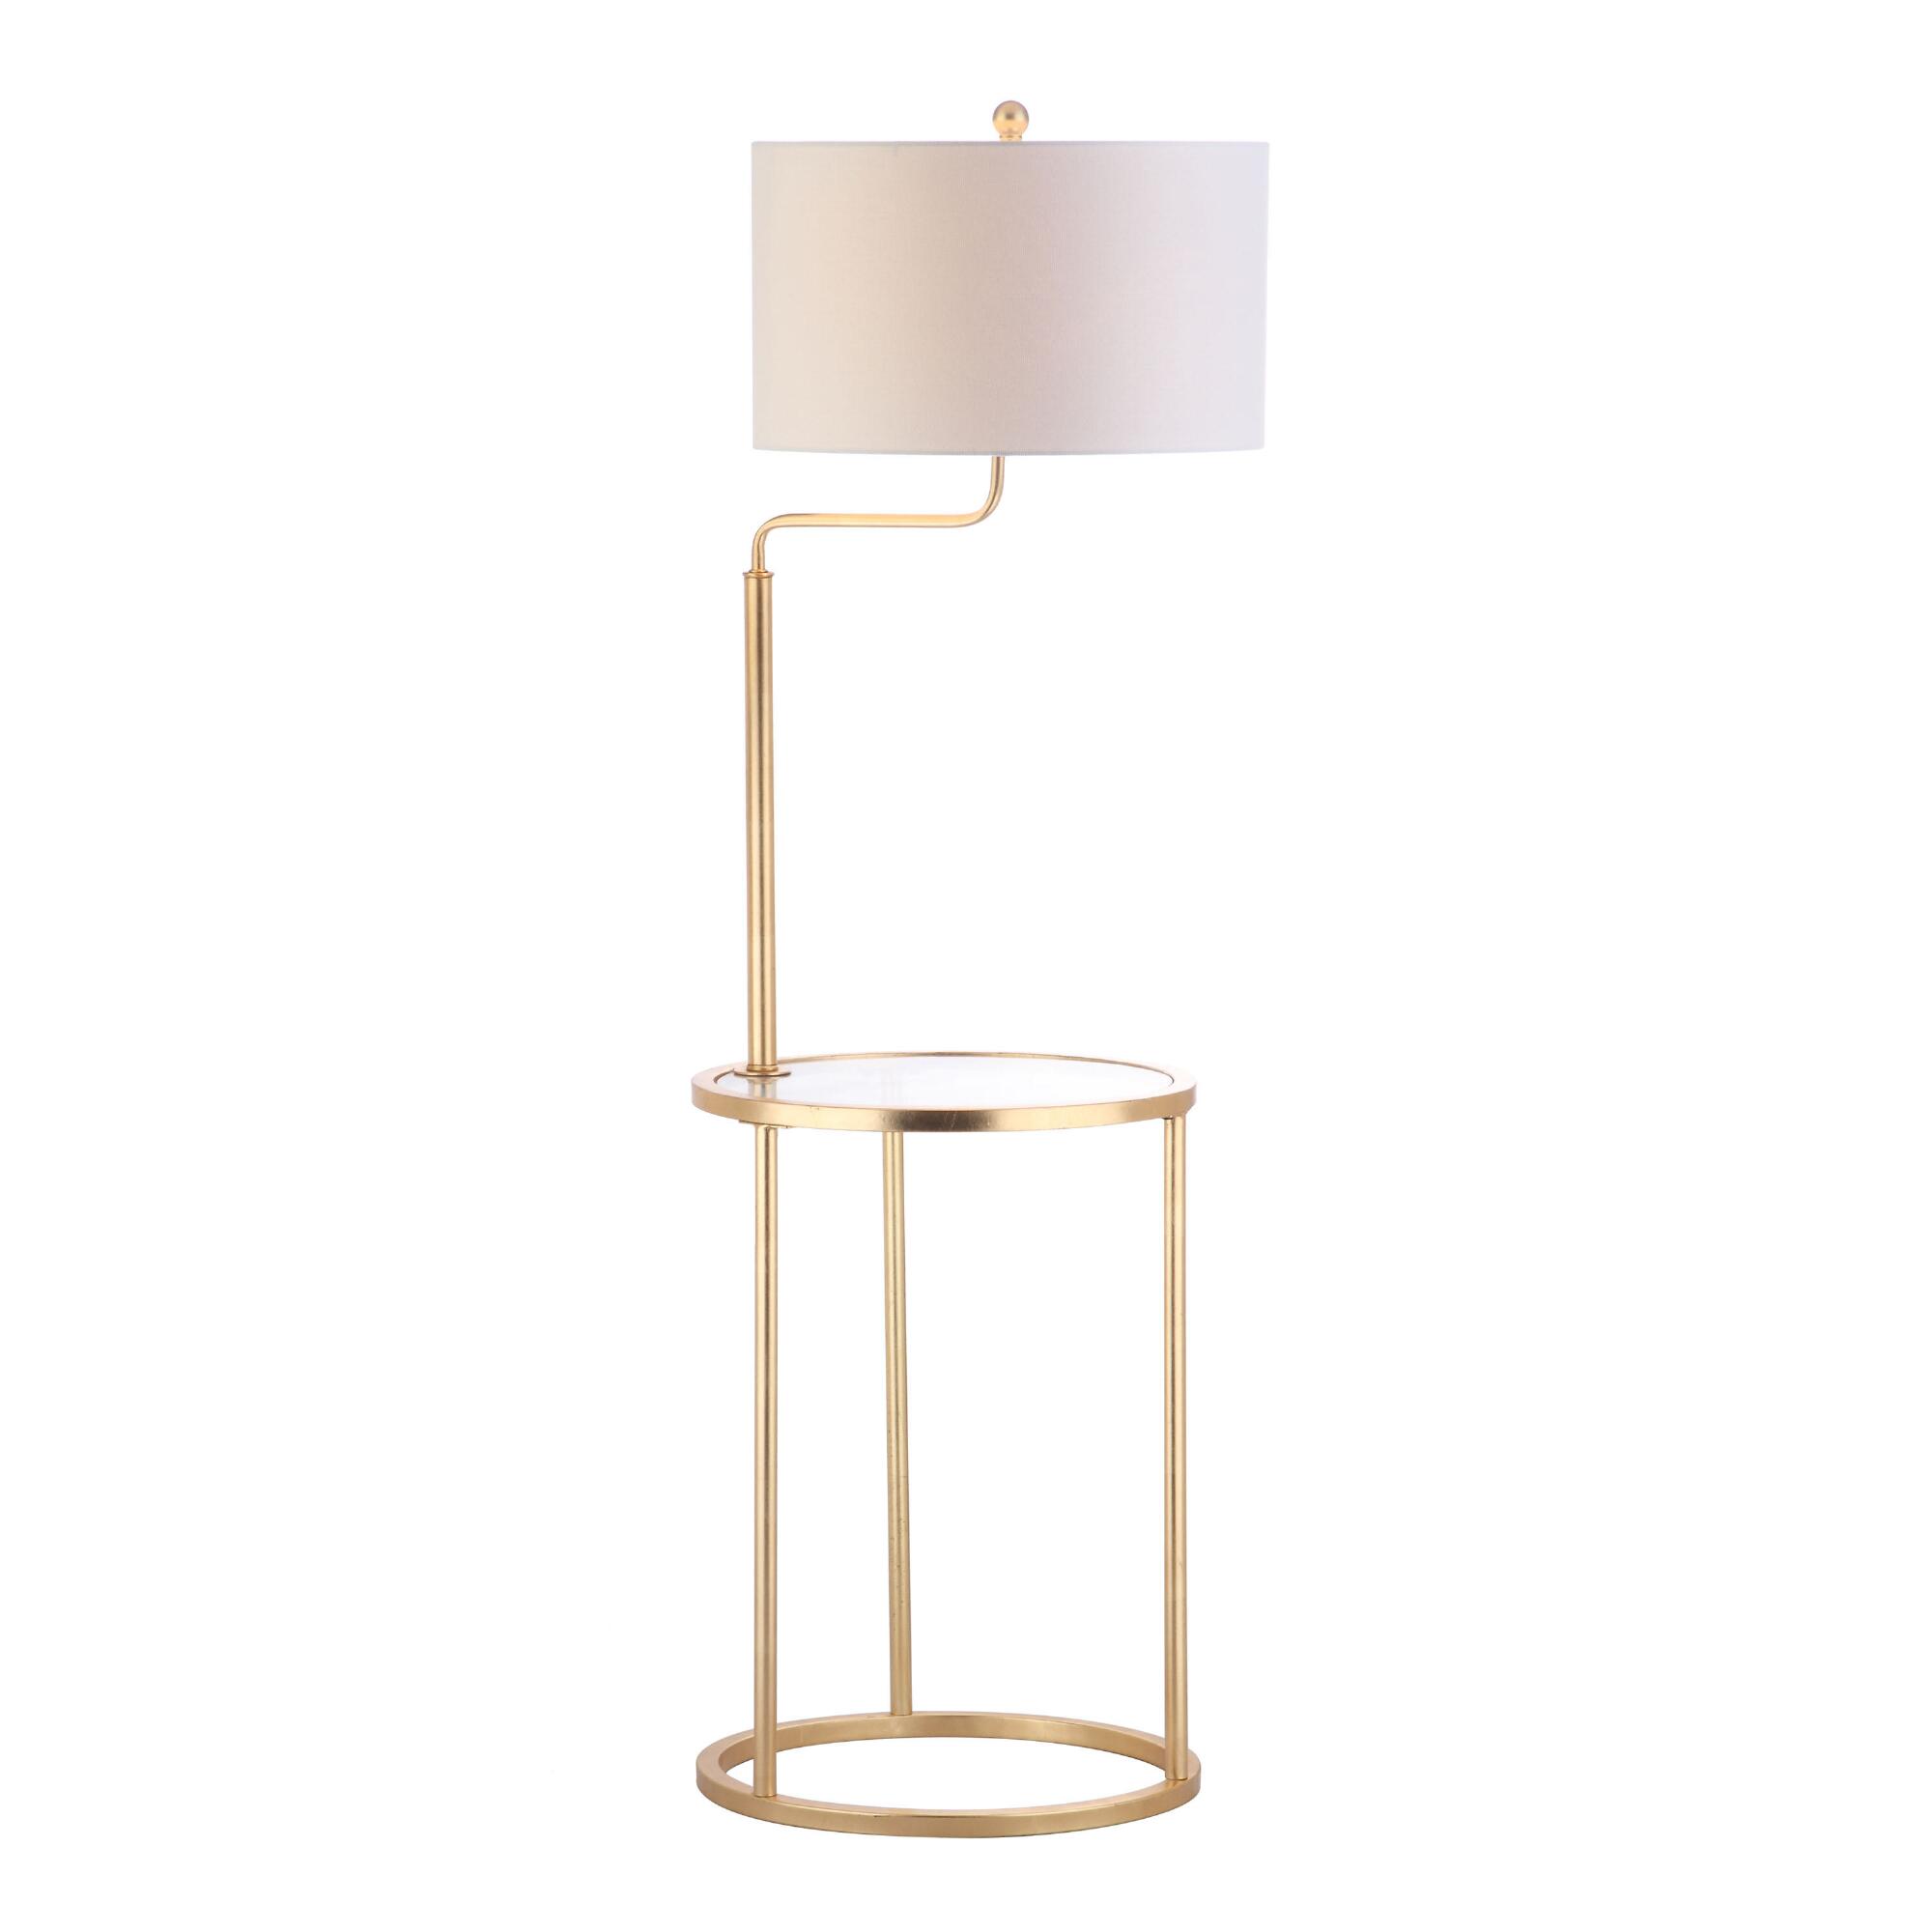 Gold and Glass Clare Floor Lamp with Table by World Market